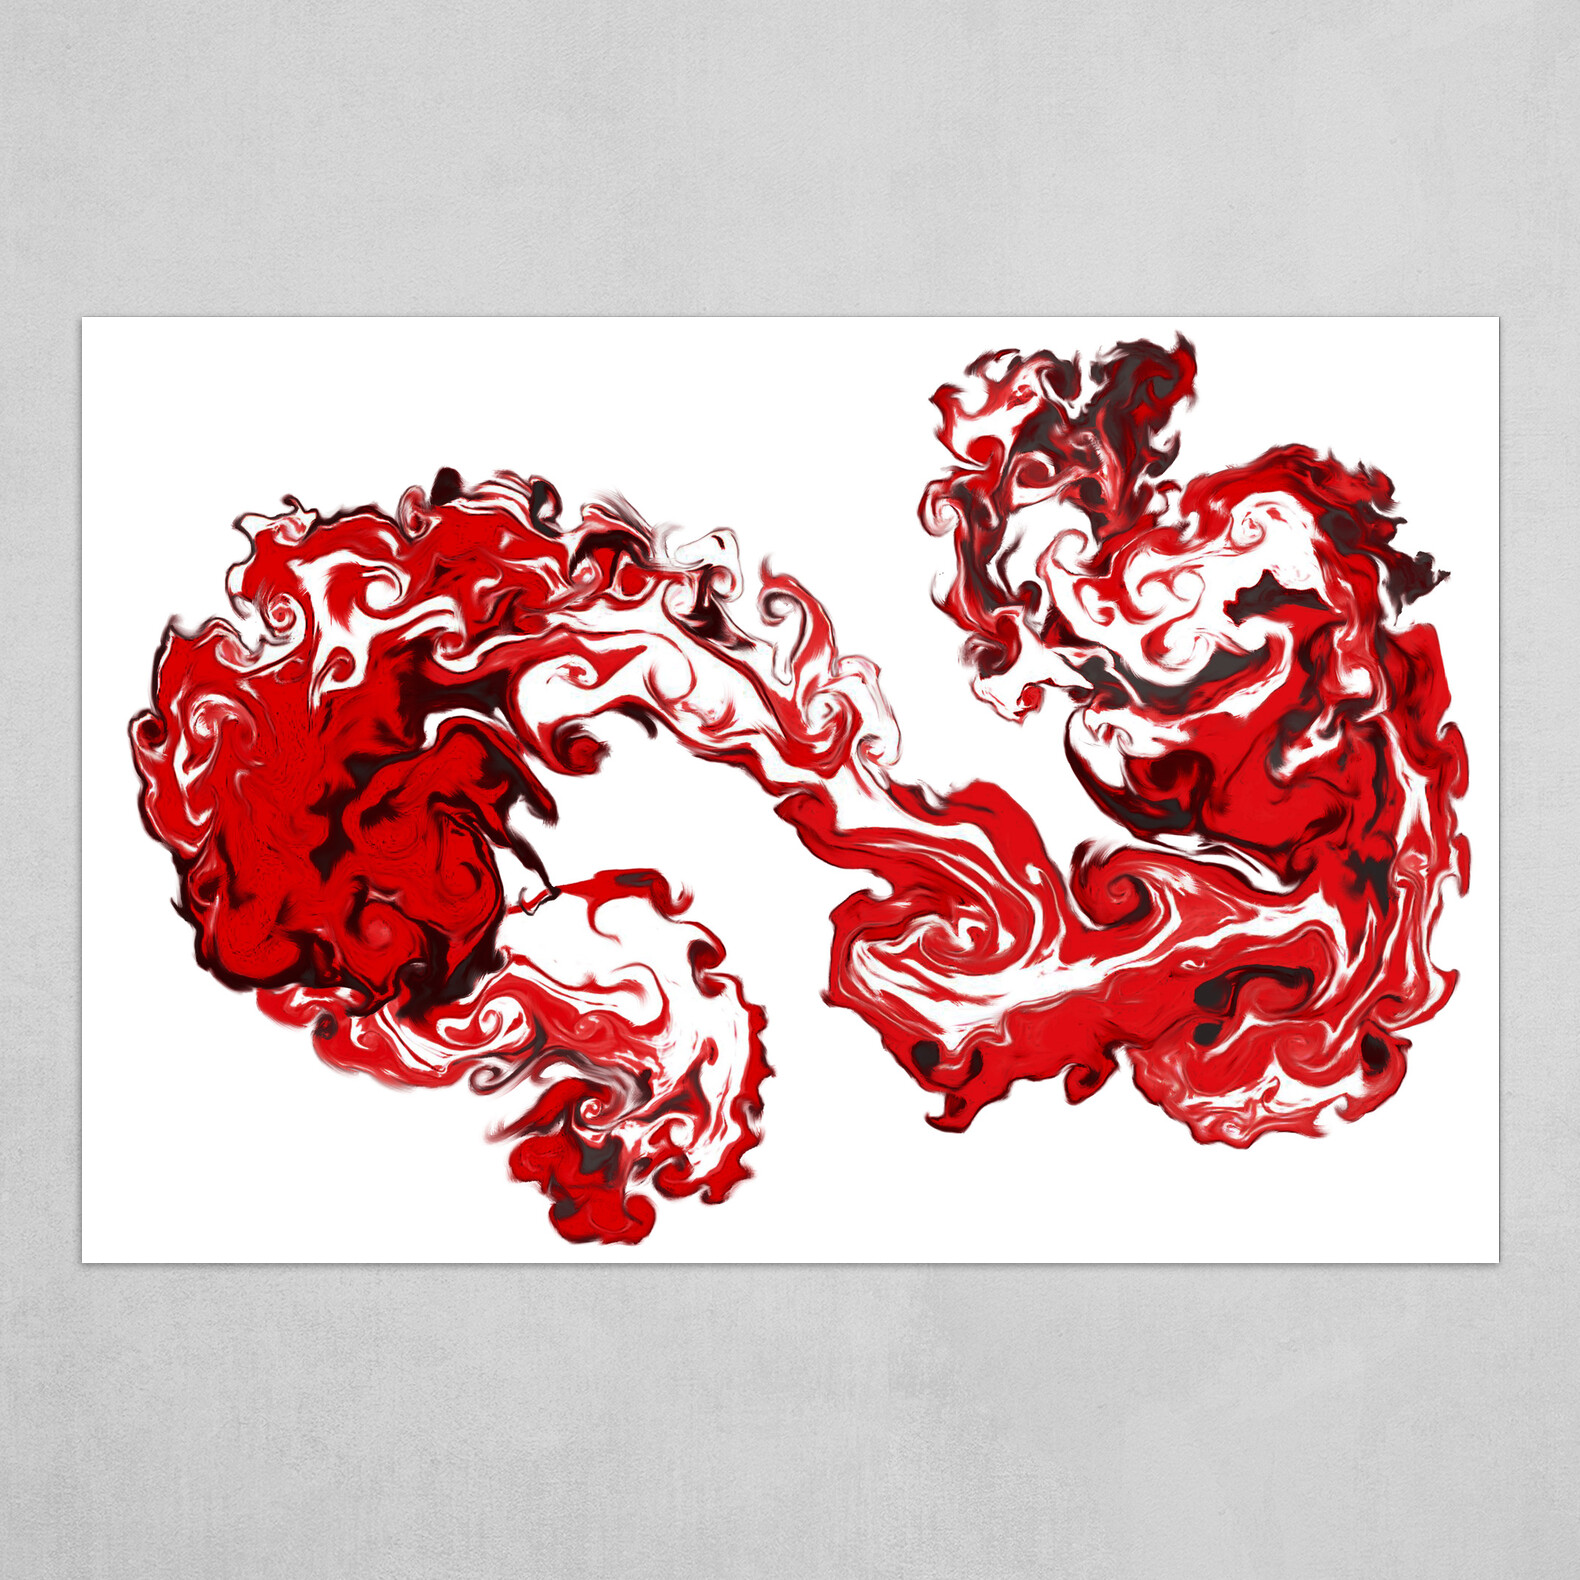 Red White and Black fluid abstract